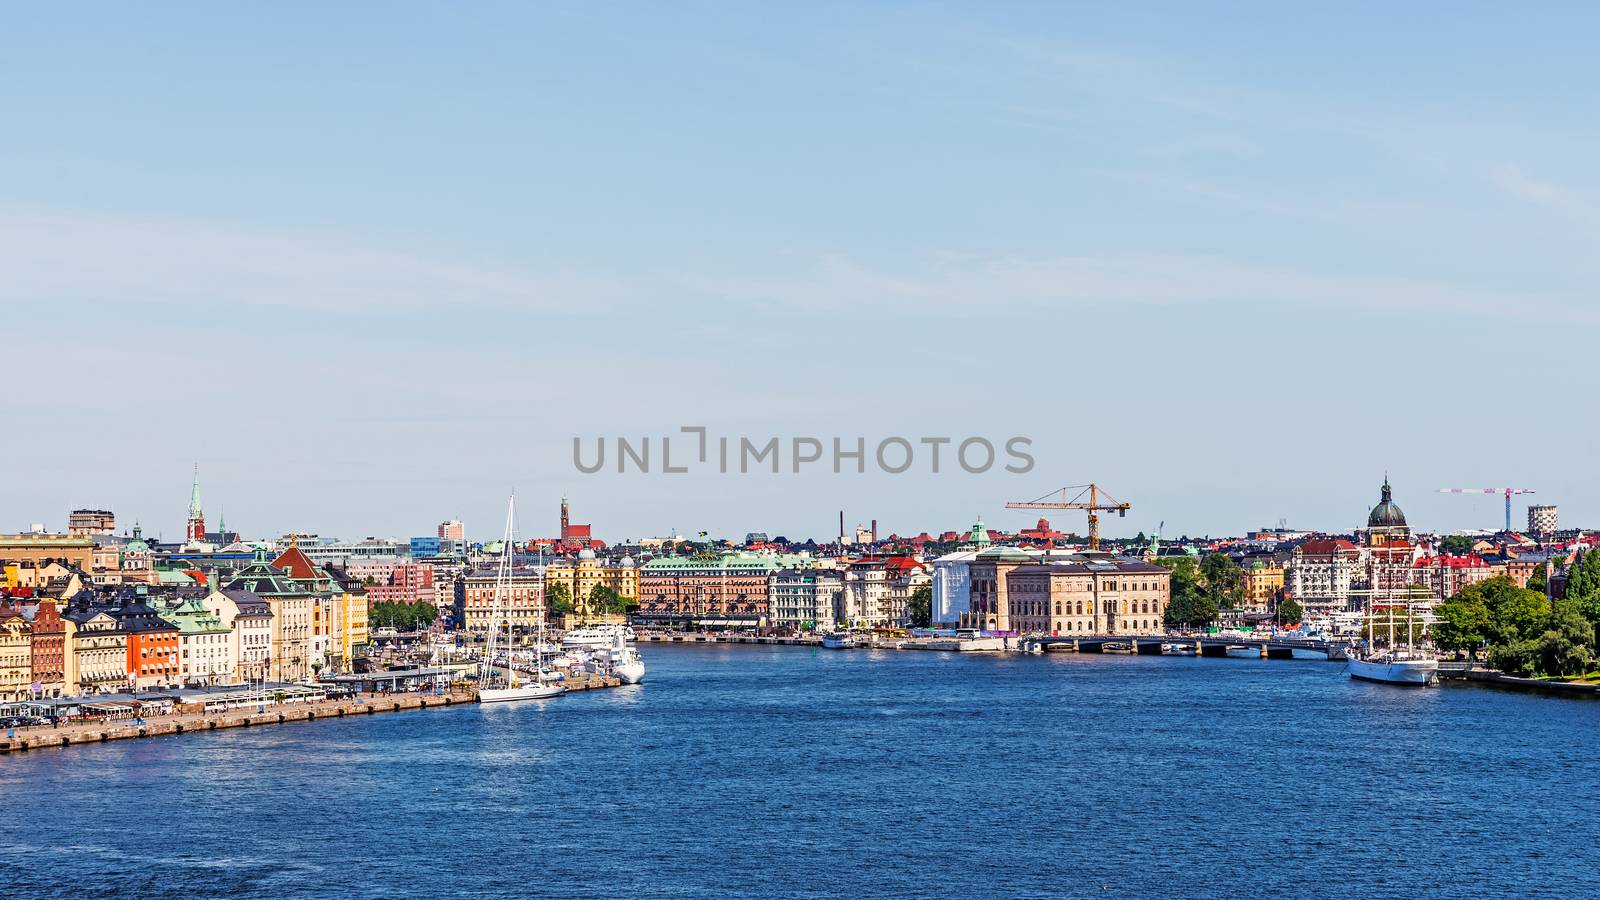 Panorama with Gamla stan (The Old Town) in Stockholm, main city attraction,  on the left. The town dates back to the 13th century with a rich collection of medieval architecture.